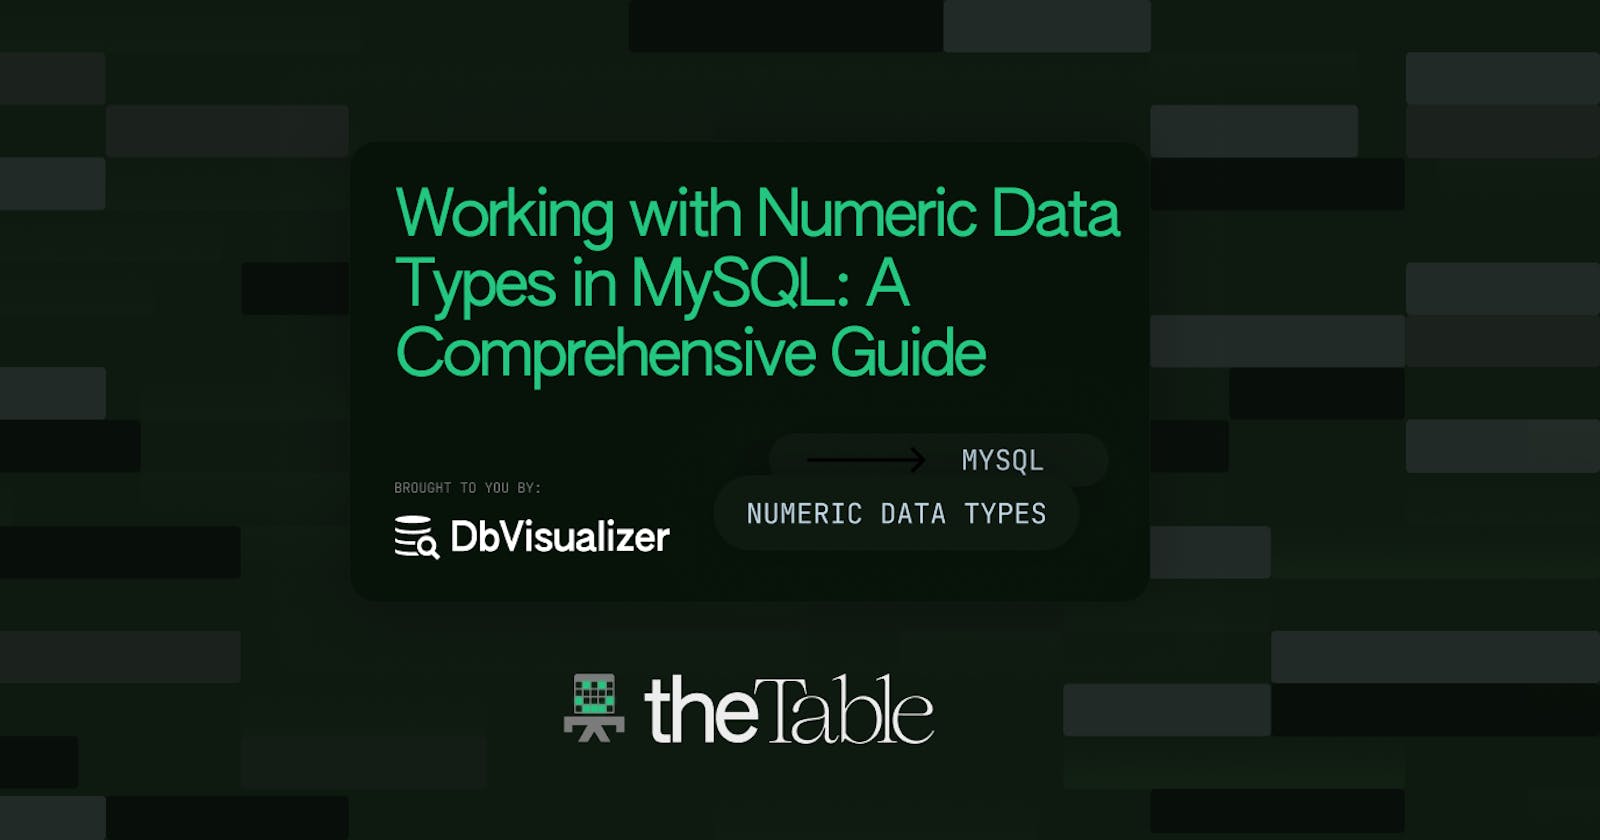 Working with Numeric Data Types in MySQL: A Comprehensive Guide